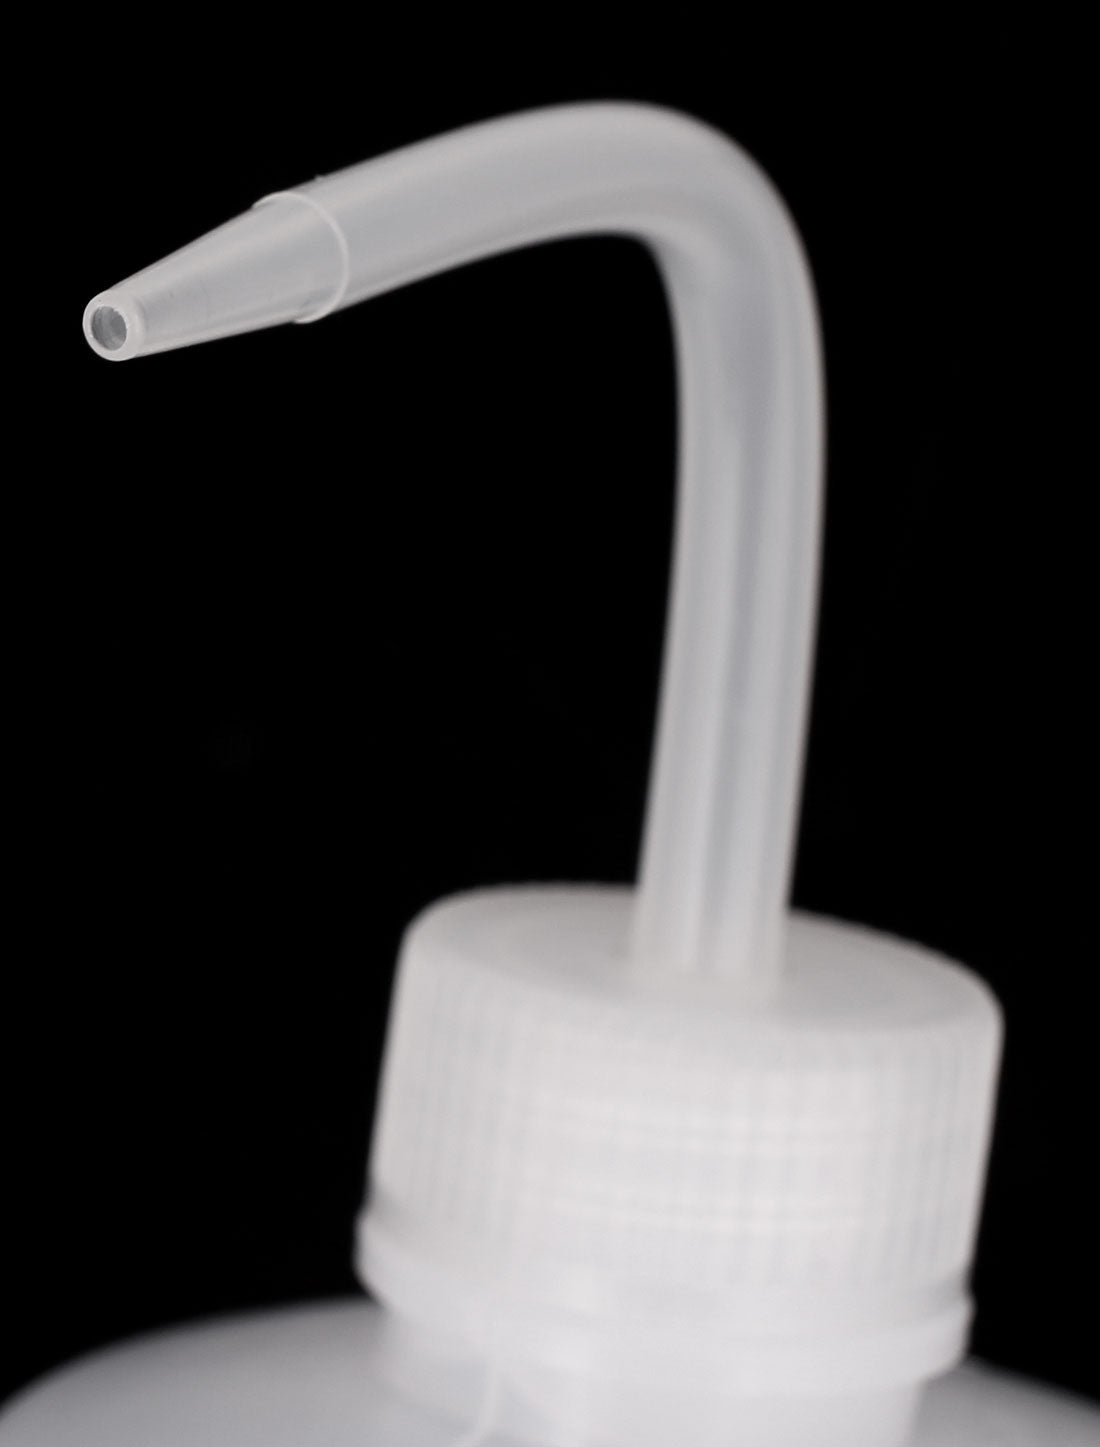 uxcell Uxcell Lab Right Angle Bent Tip Plastic Liquid Storage Squeeze Bottle Dispenser 500mL